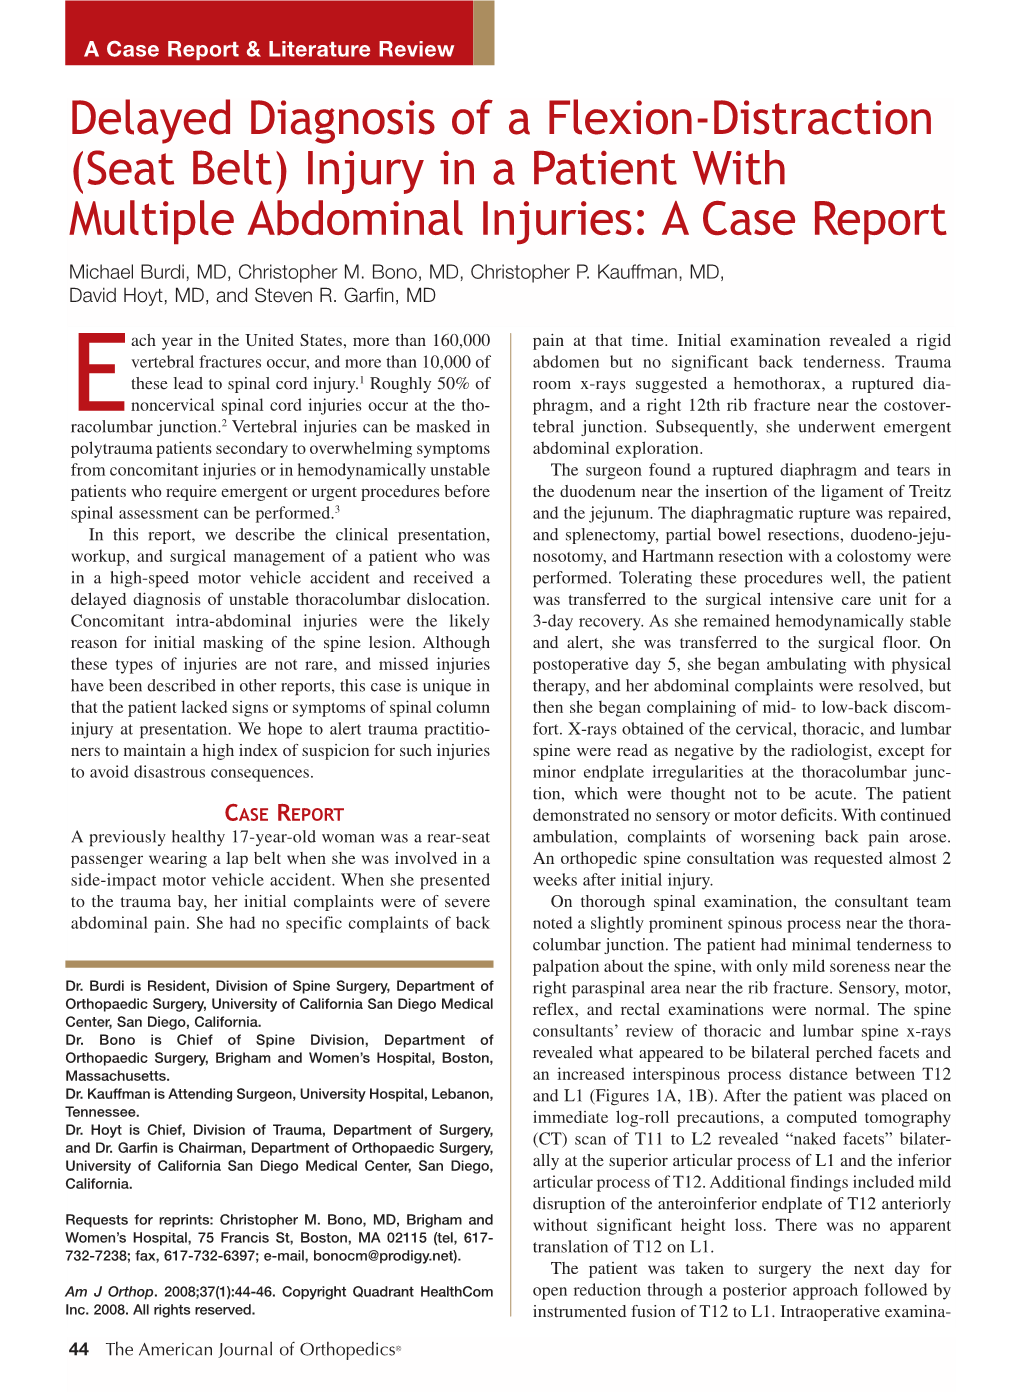 Seat Belt) Injury in a Patient with Multiple Abdominal Injuries: a Case Report Michael Burdi, MD, Christopher M